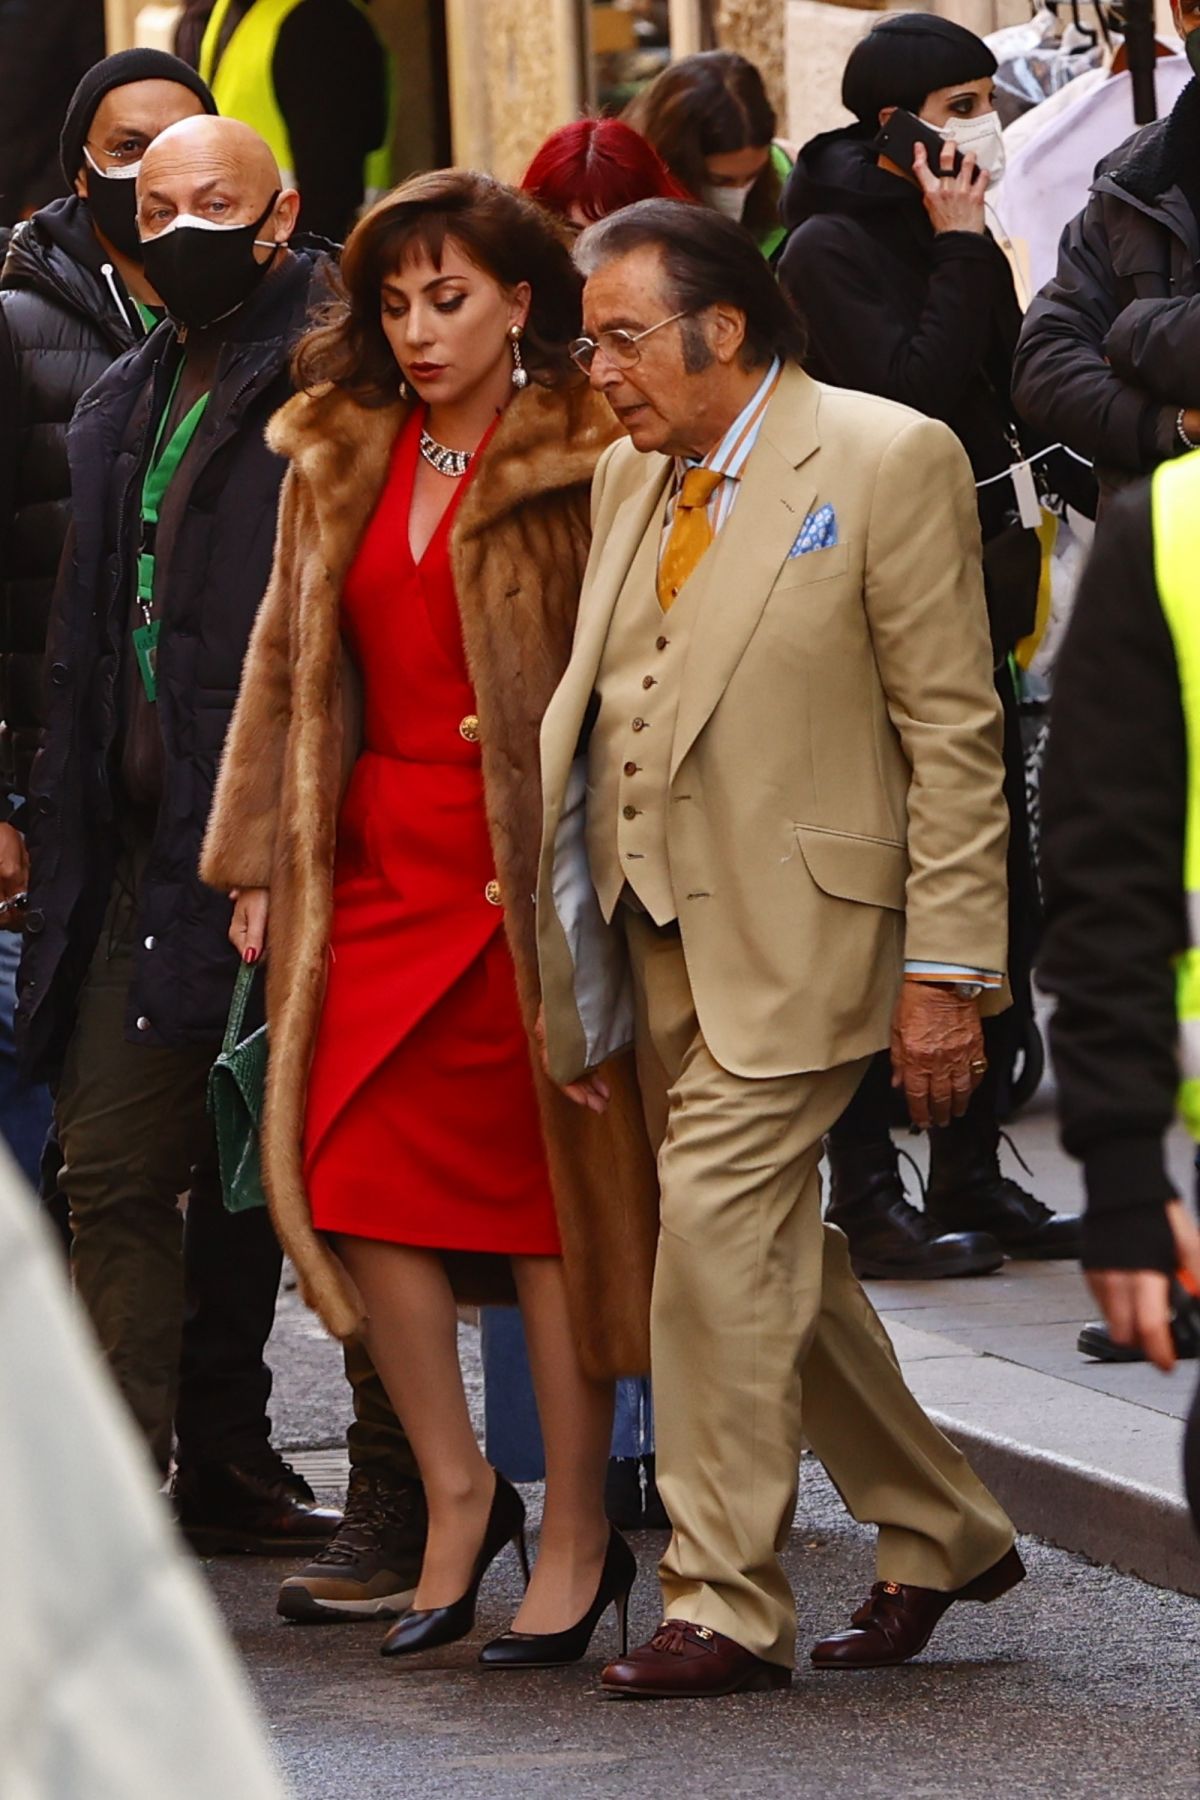 lady-gaga-and-al-pacino-on-the-set-of-house-of-gucci-in-rome-03-22-2021-6.jpg